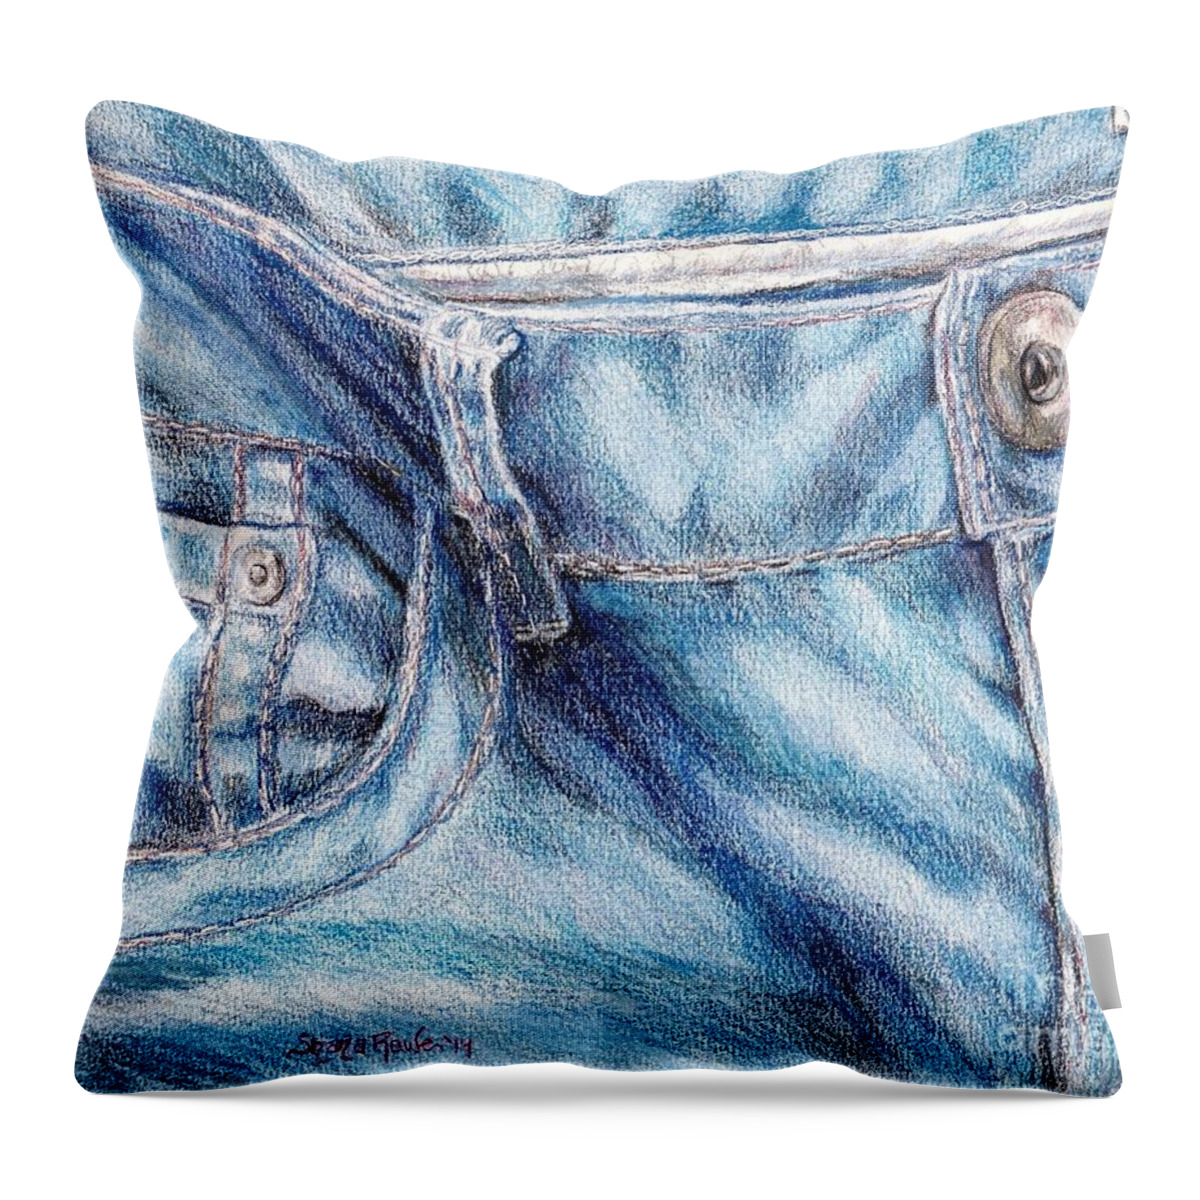 Jean Throw Pillow featuring the painting Her Favorite Pair of Jeans by Shana Rowe Jackson